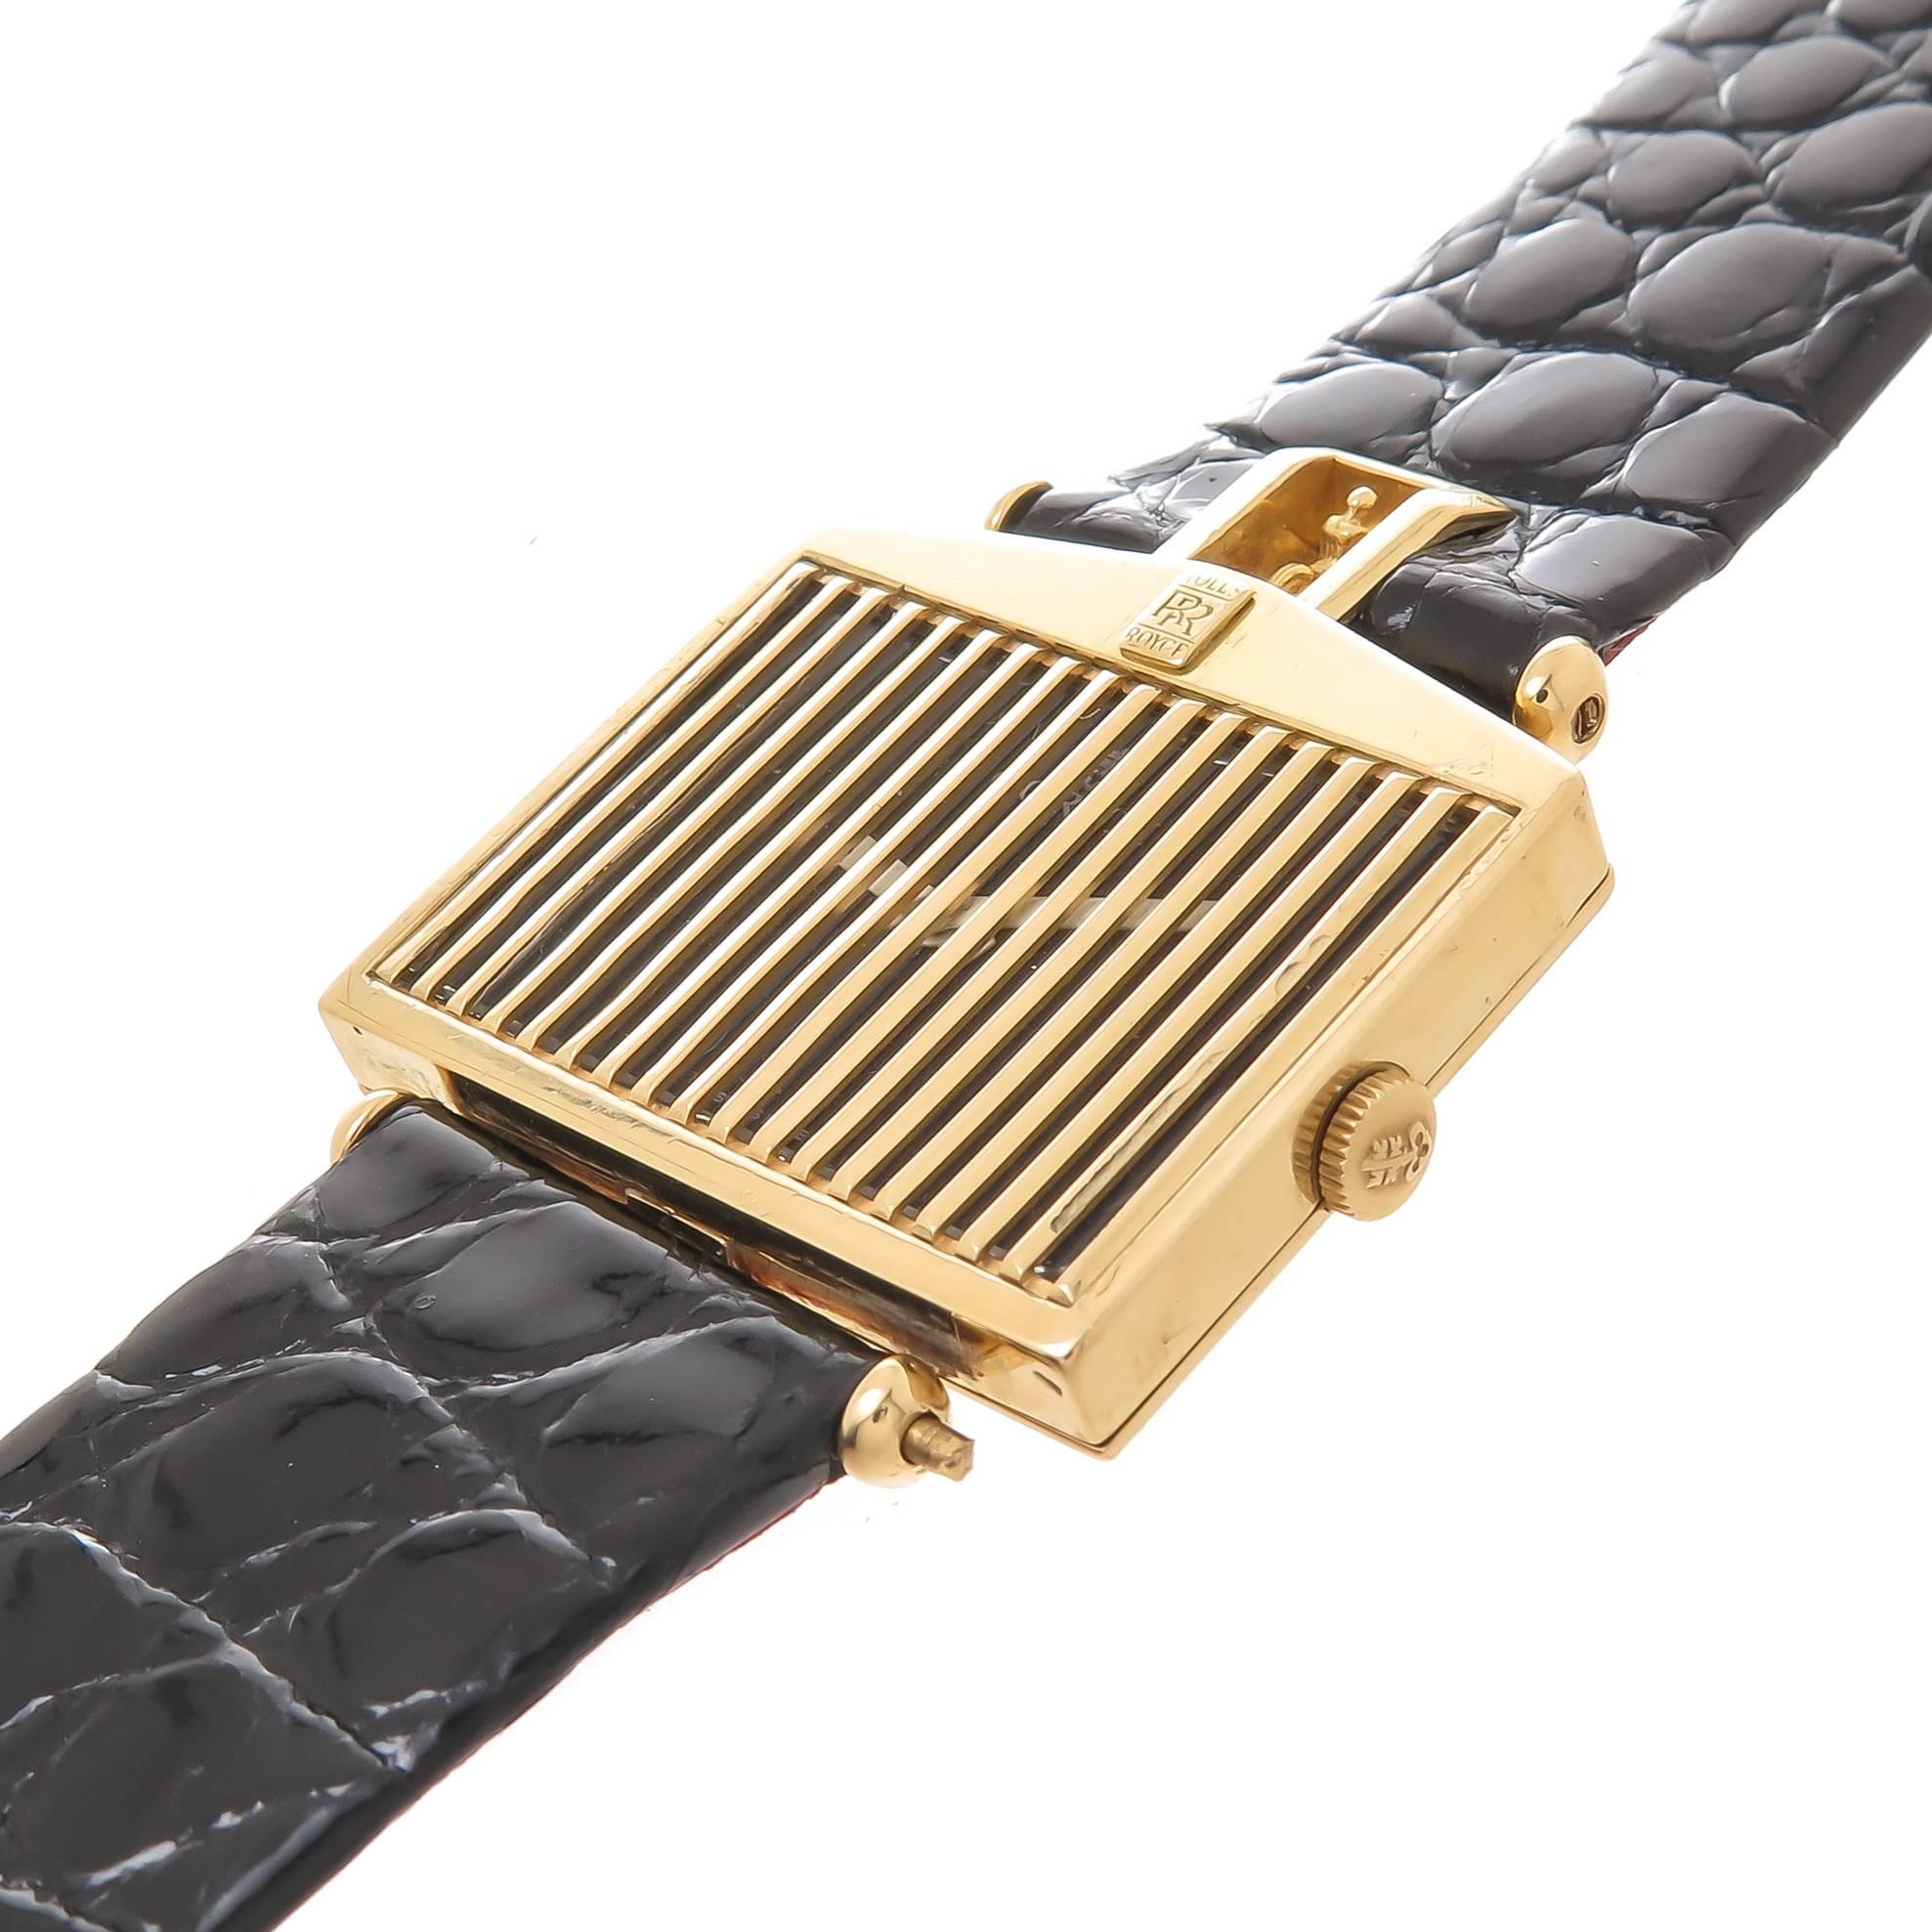 Circa 1980 Corum Rolls-Royce Wrist Watch, 33 X 29 MM 18K Yellow Gold Case, Having a Gold Grill over the crystal that protects the Black Dial with White Hands. 17 Jewel mechanical, Manual wind Movement. Original Black Textured strap with original